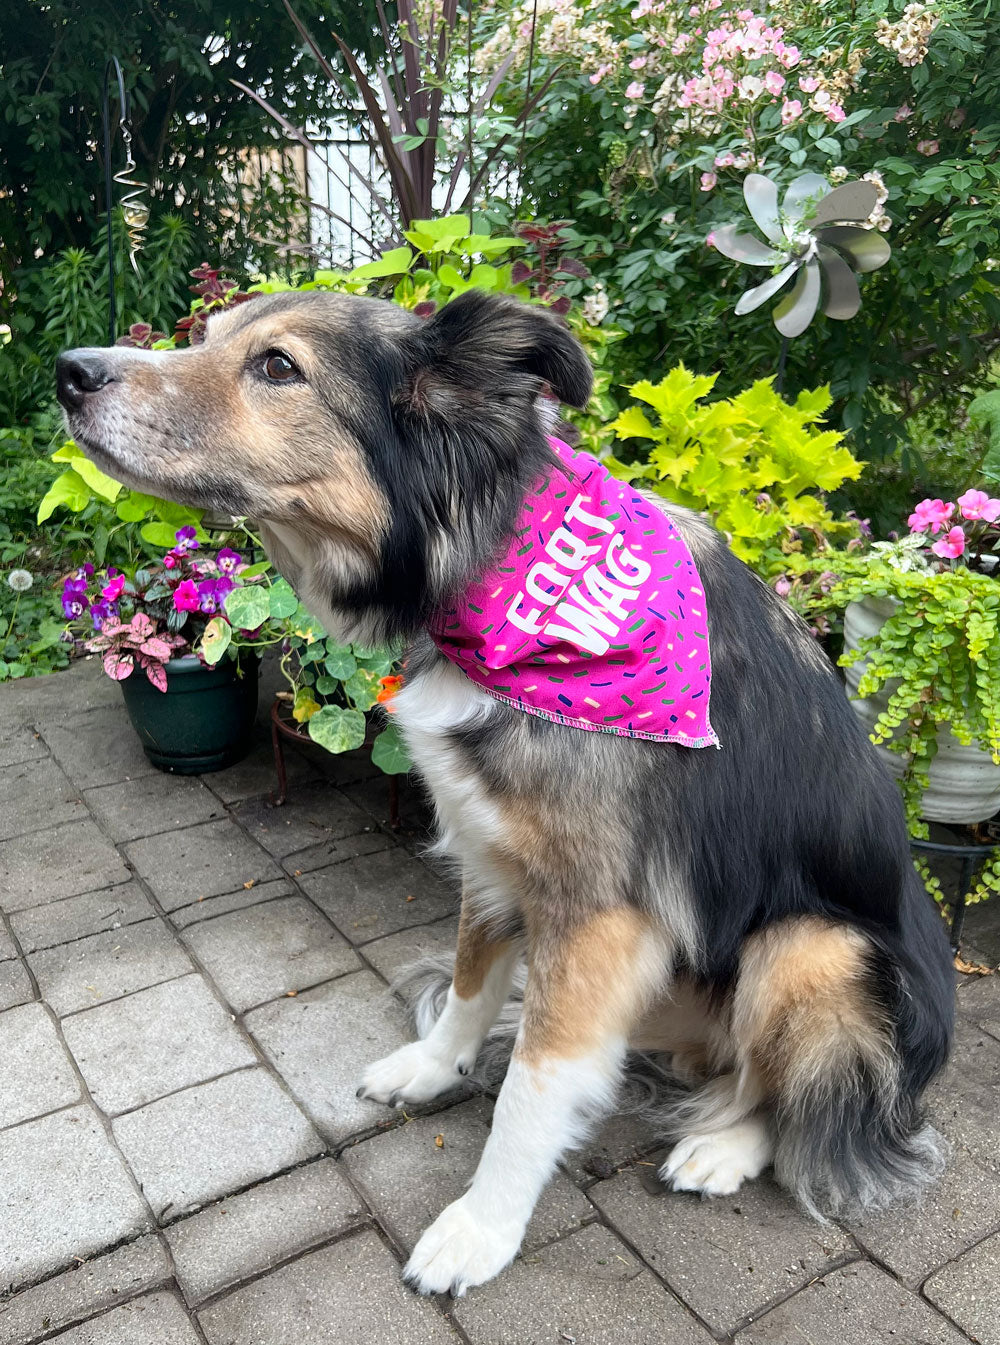 Pink Fort Wag Dog Bandana on long haired dog by plants